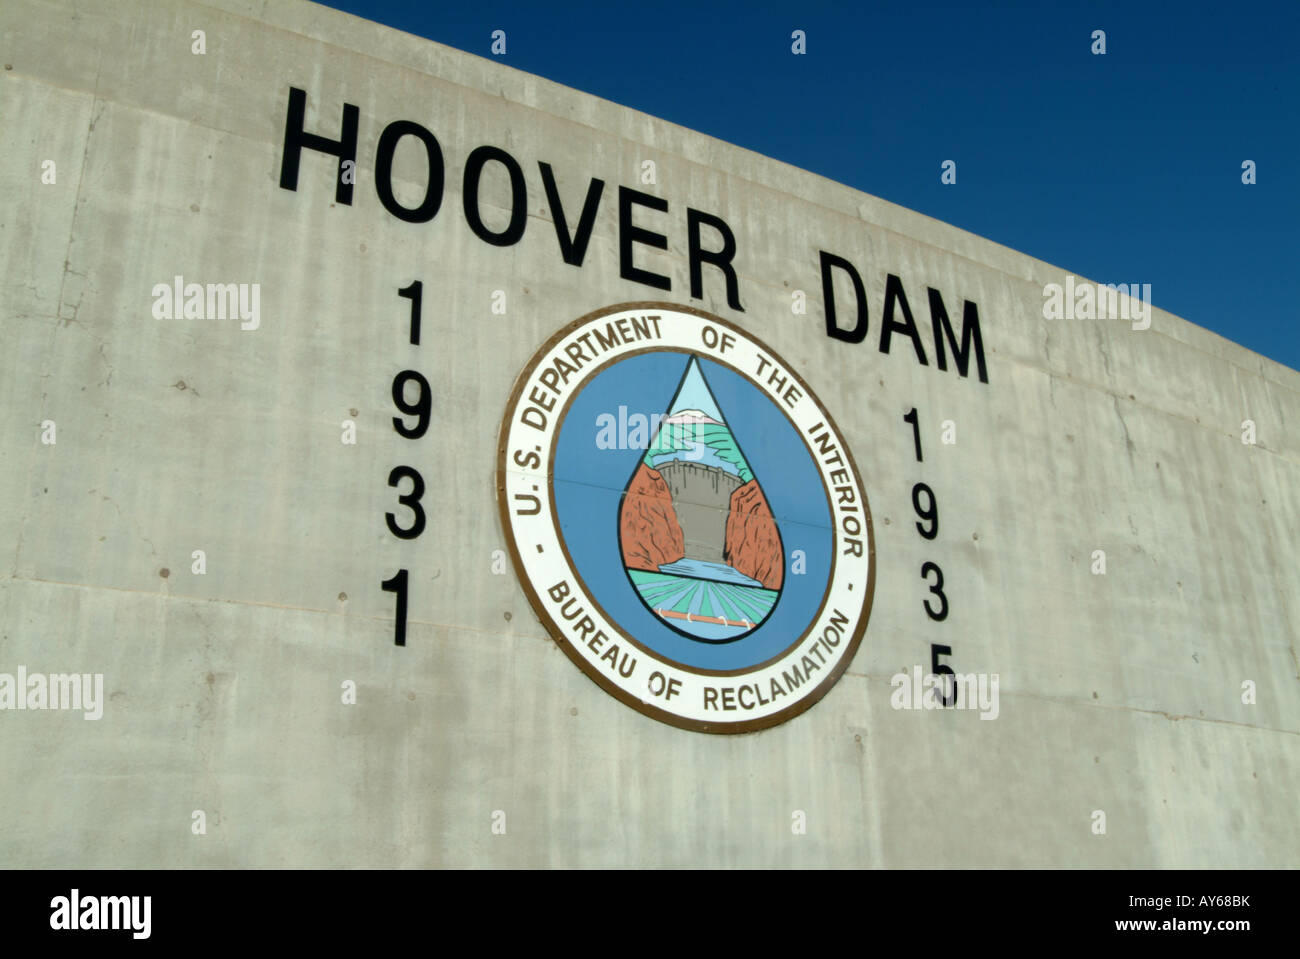 Hoover dam 1931 to 1935 Stock Photo